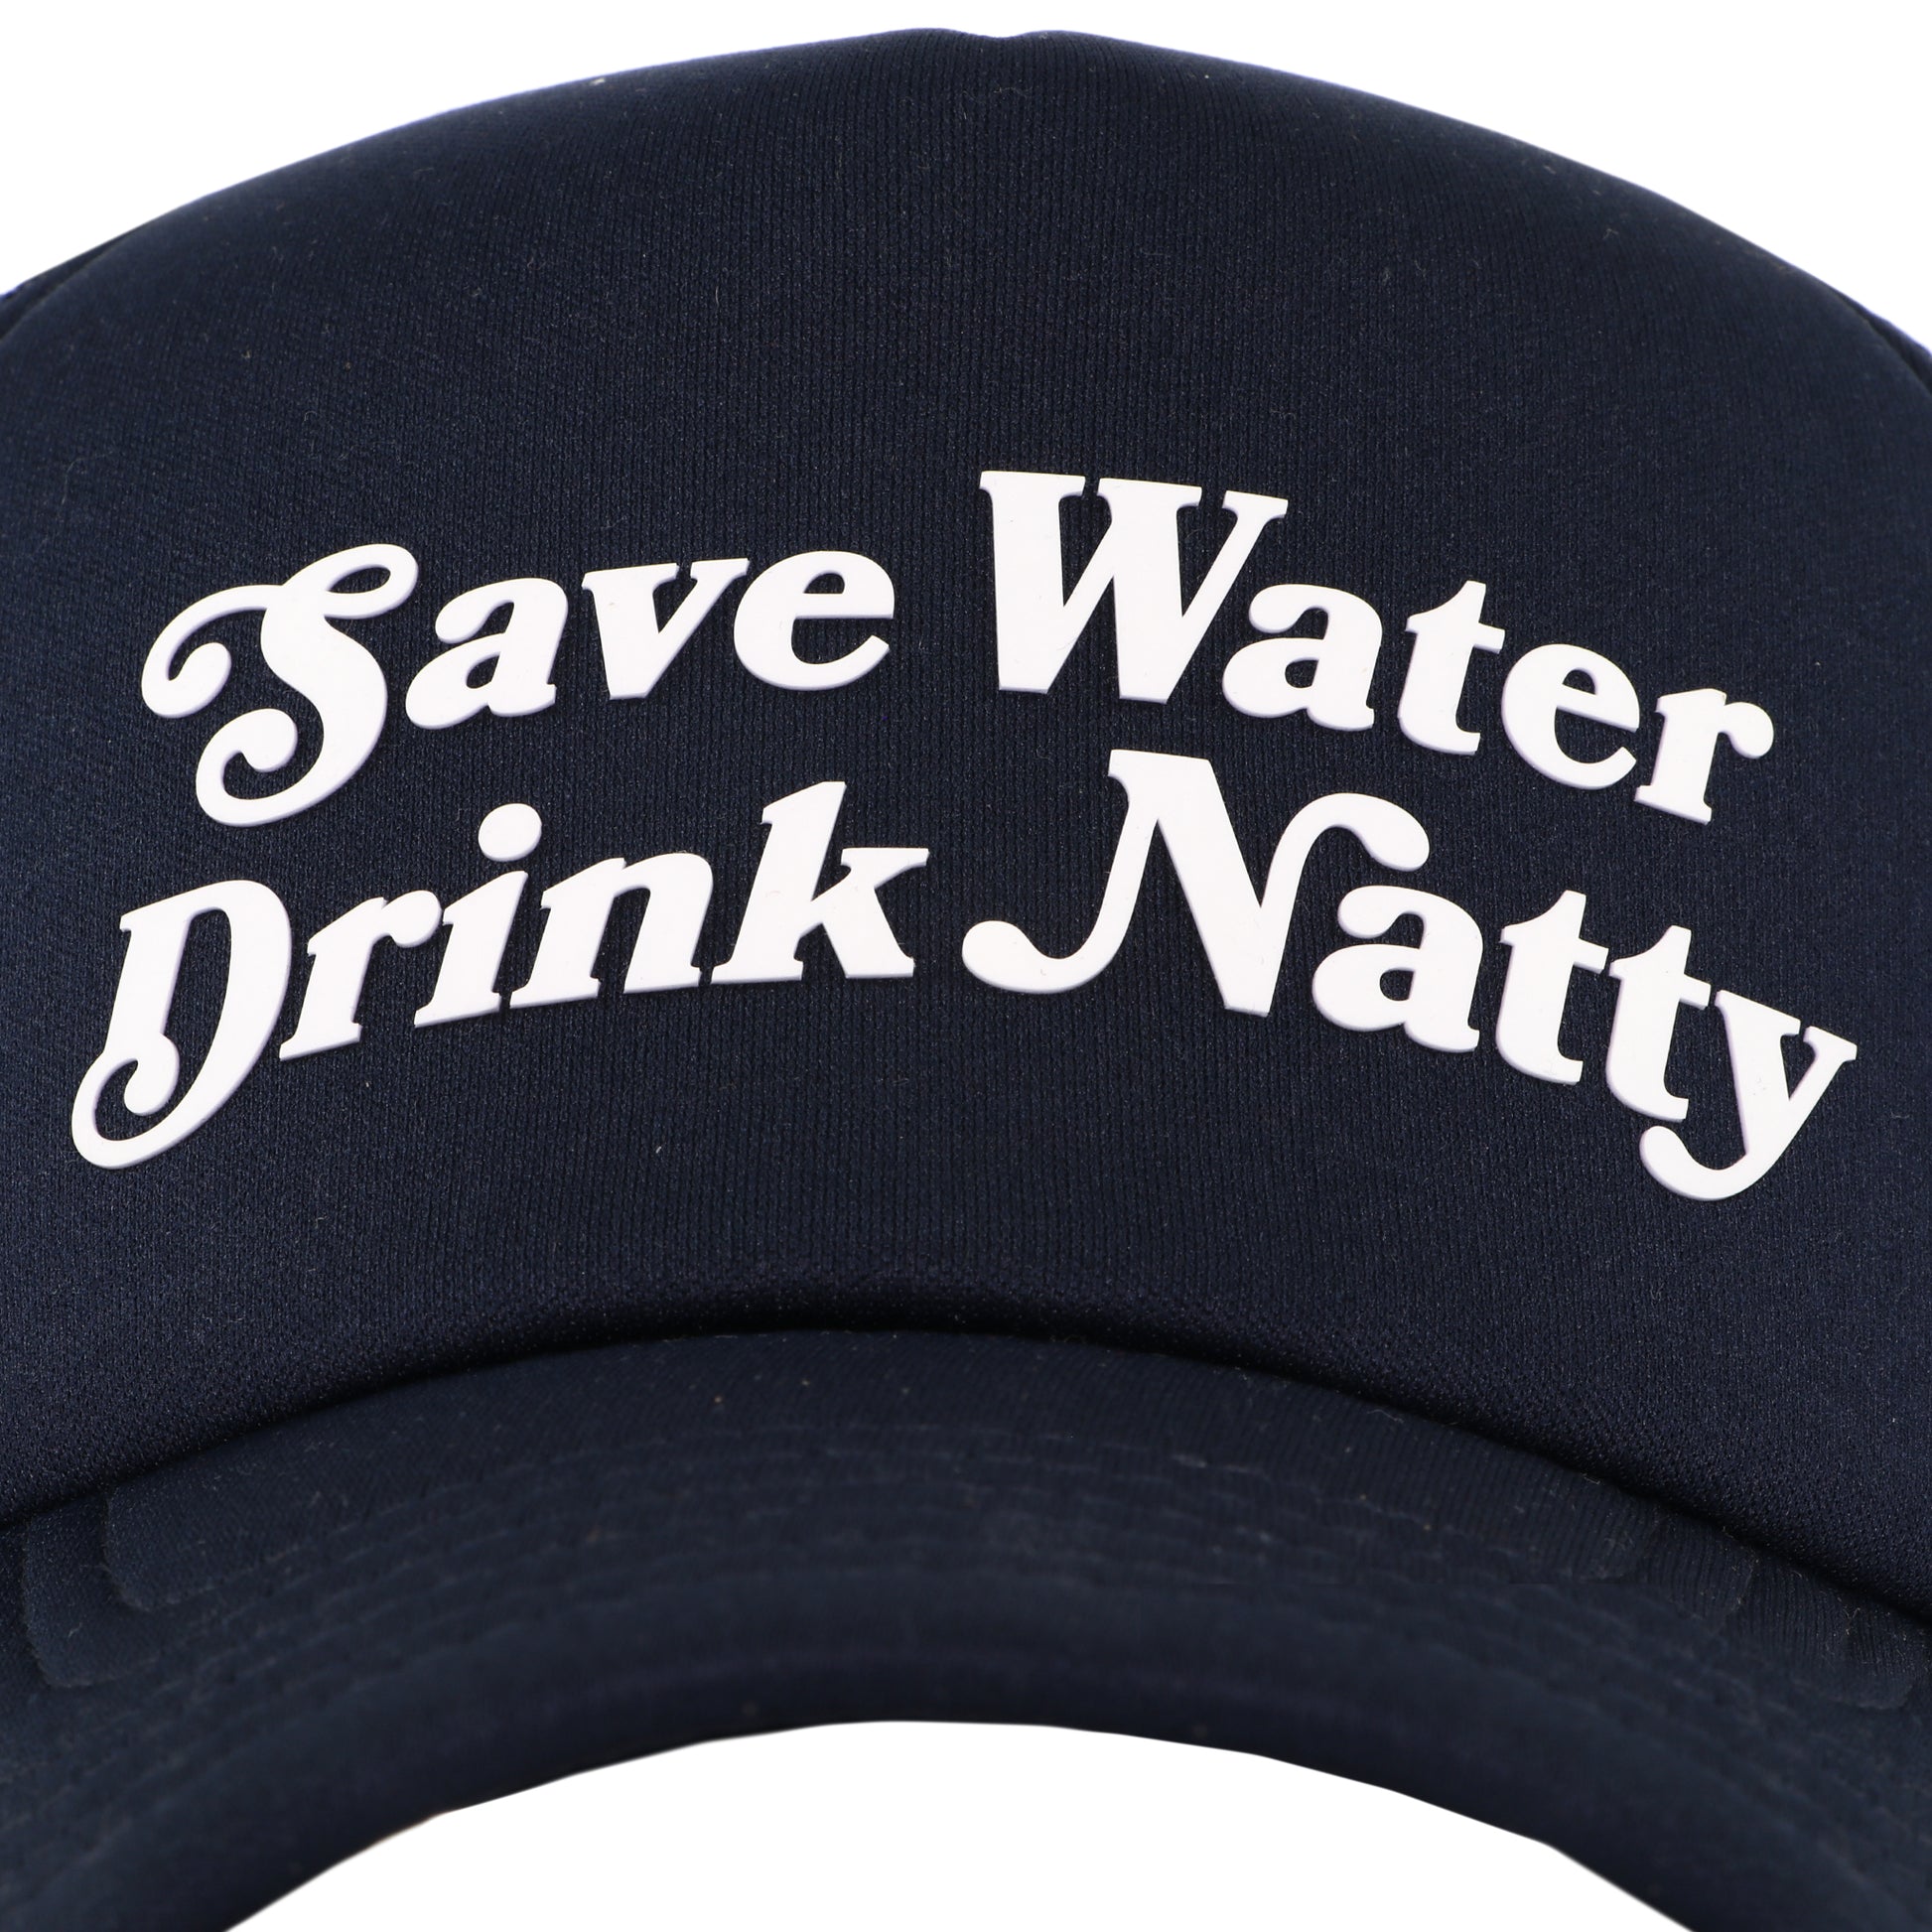 Close up front view of "Save Water Drink Natty" Trucker hat